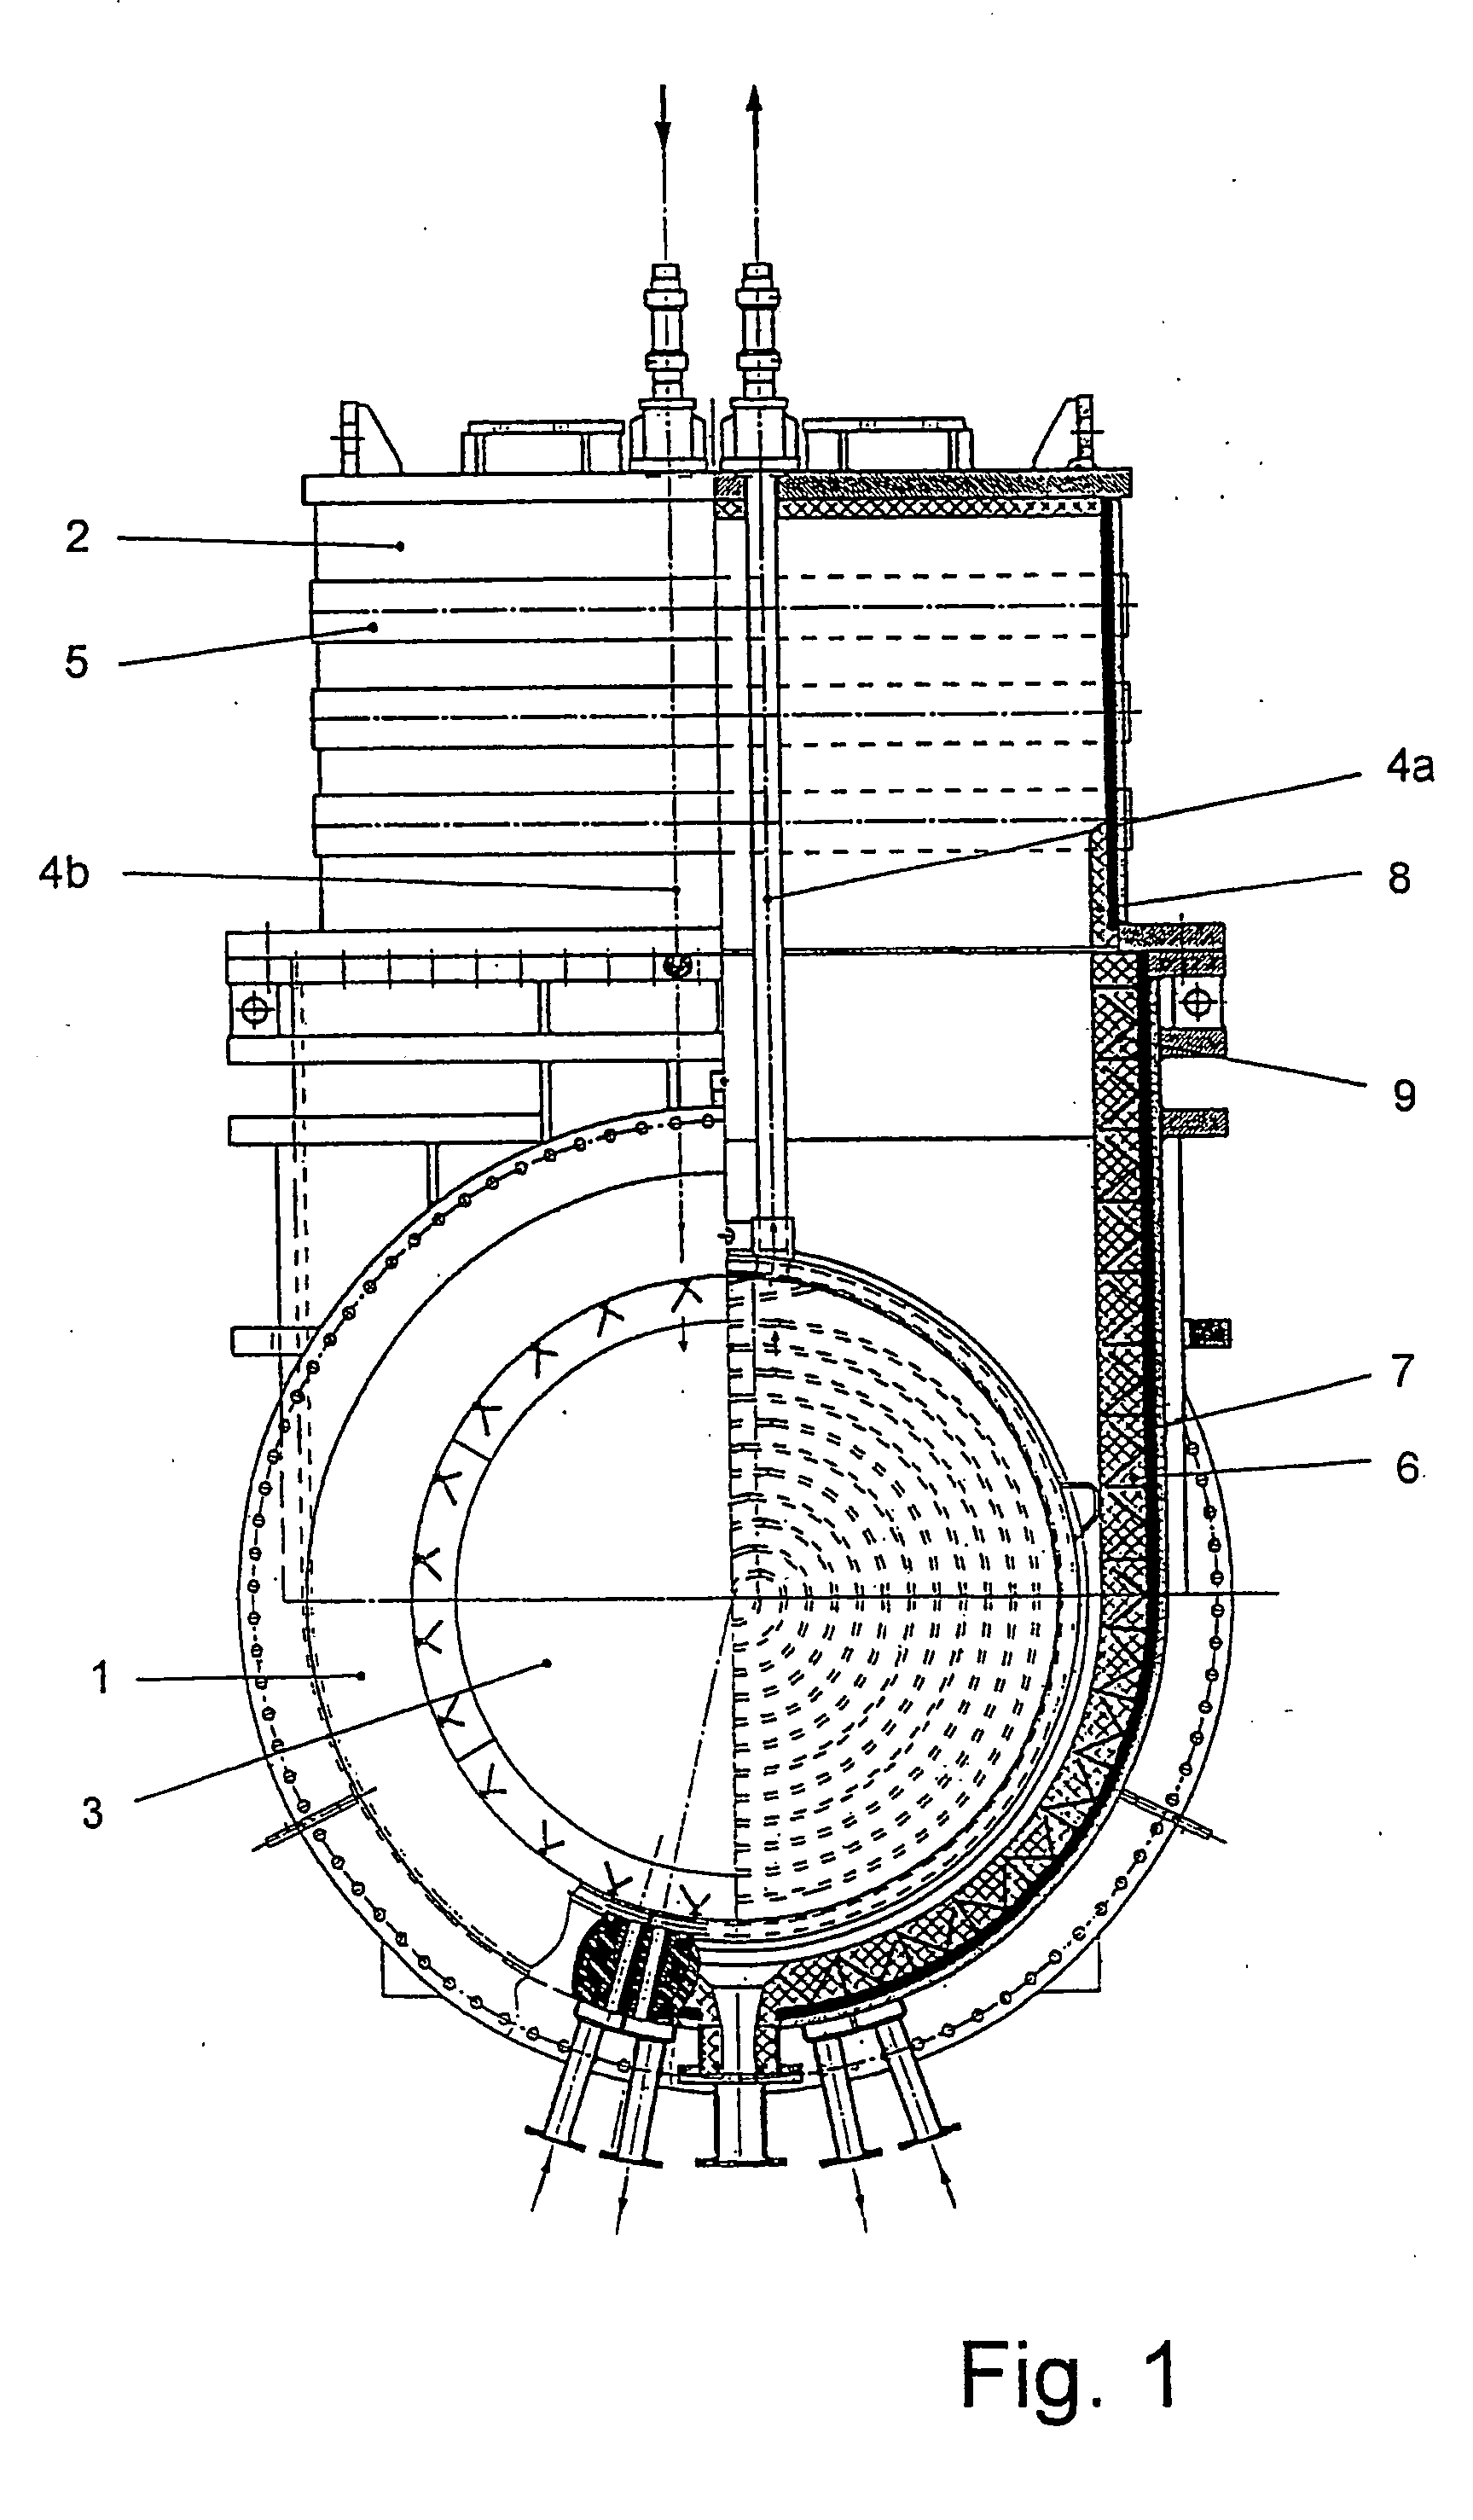 Device for protecting metallic surfaces from high-temperature condensates of corrosive media in technical installations